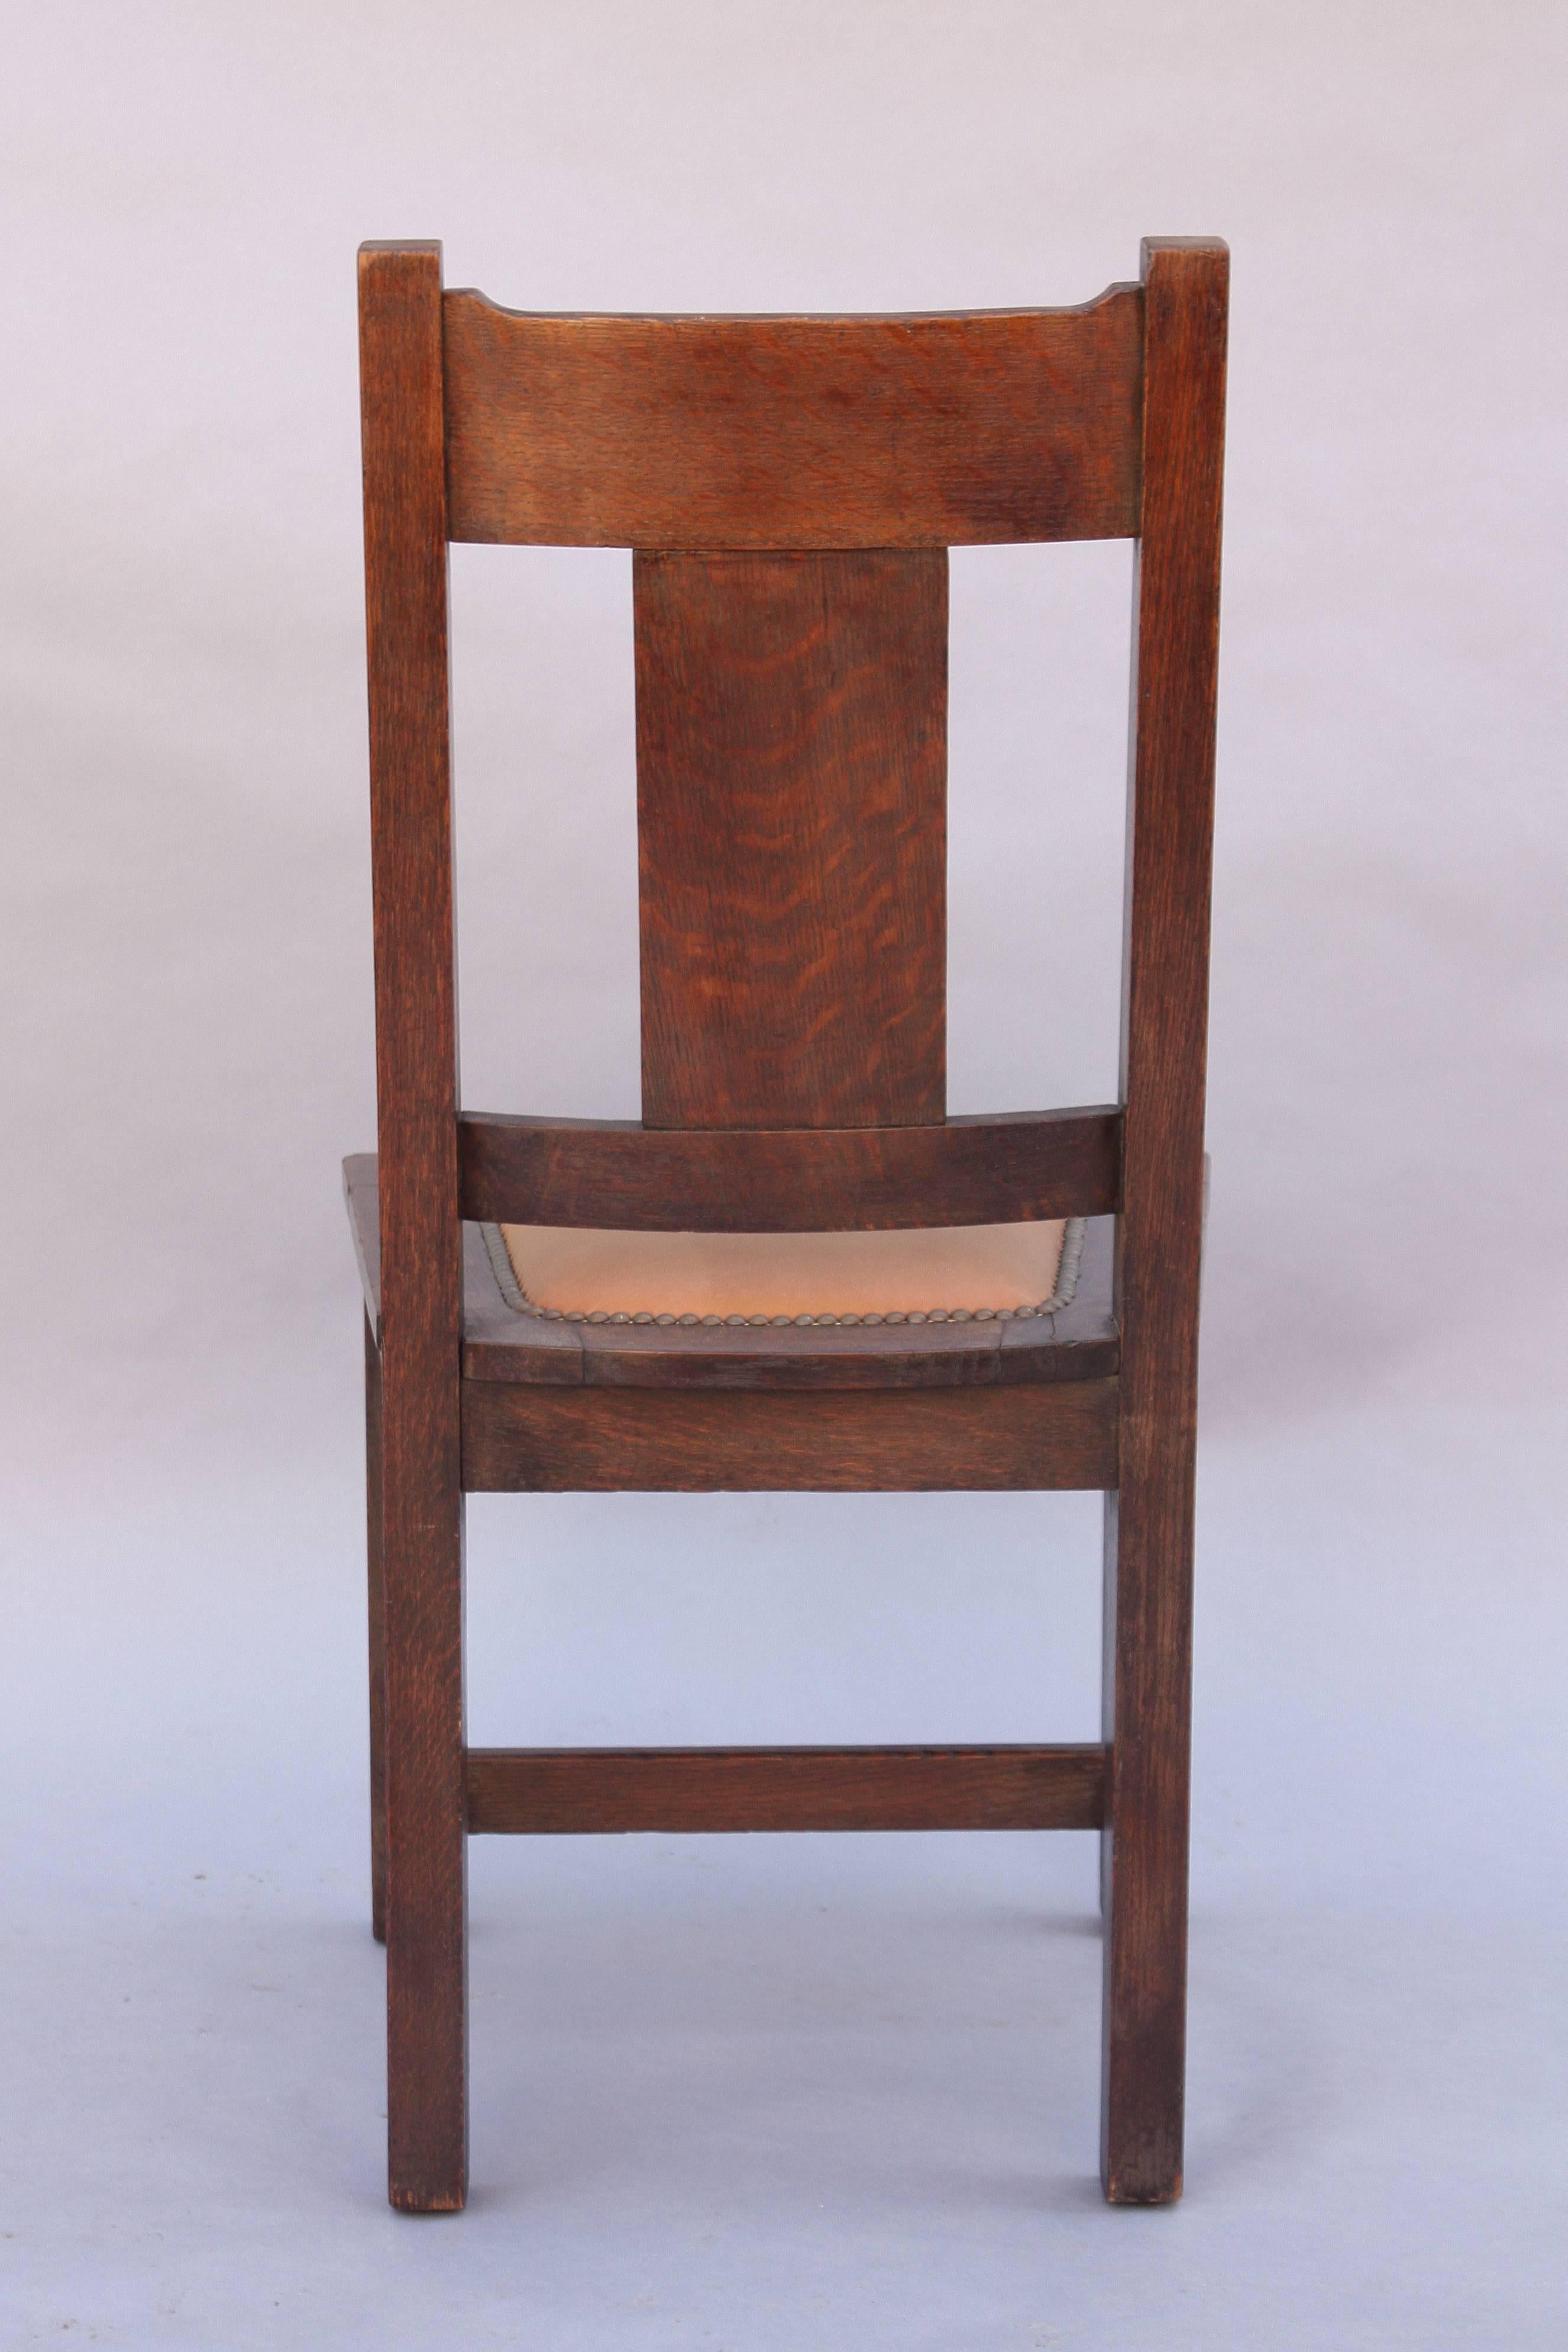 Oak side chair with riveted leather upholstery, circa 1910.